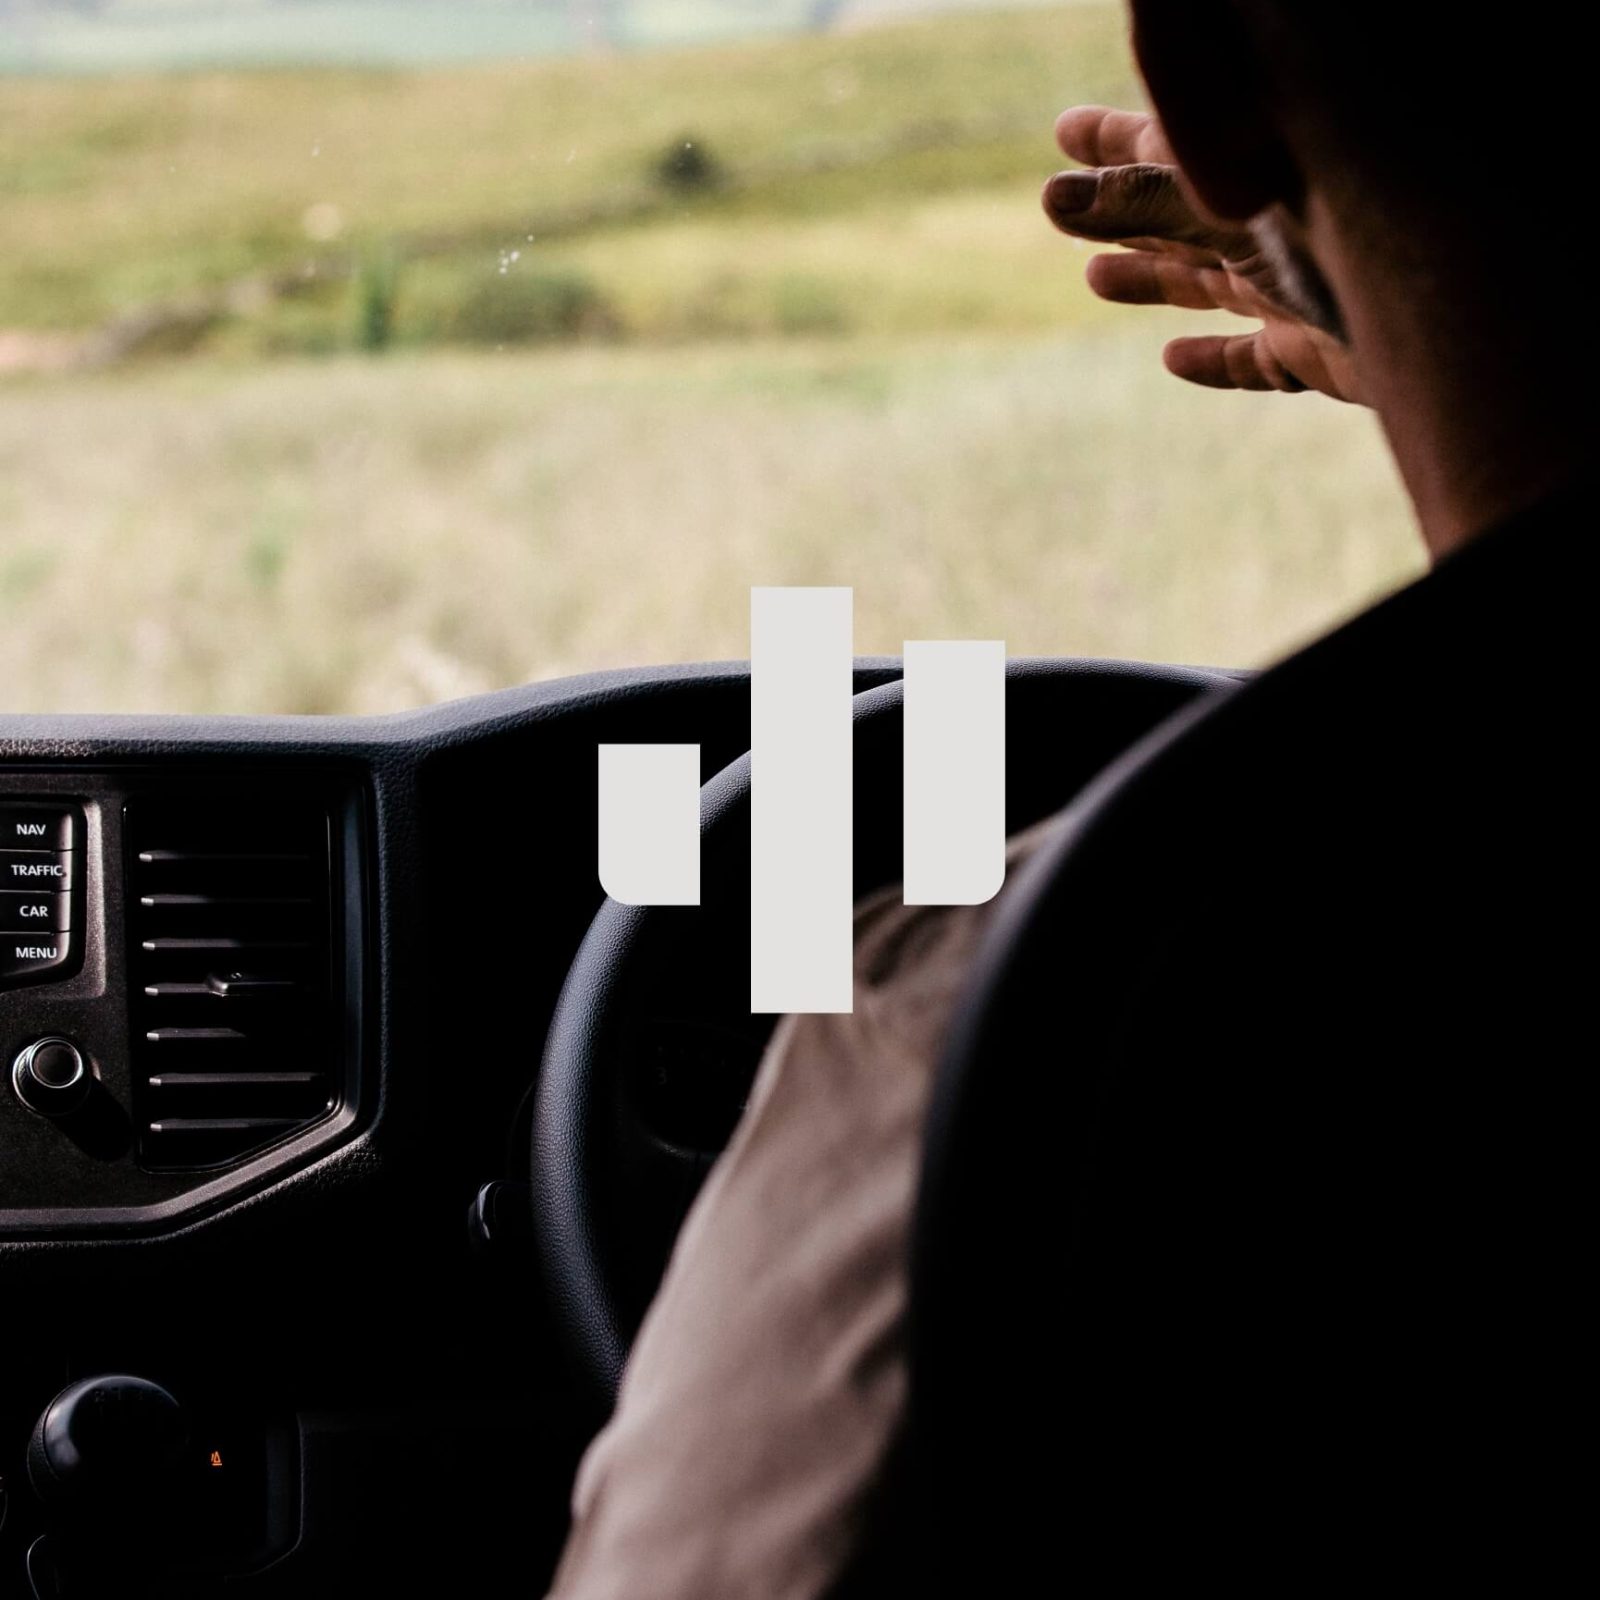 The image shows the back view of a person driving a car, looking out at a scenic landscape through the windshield.